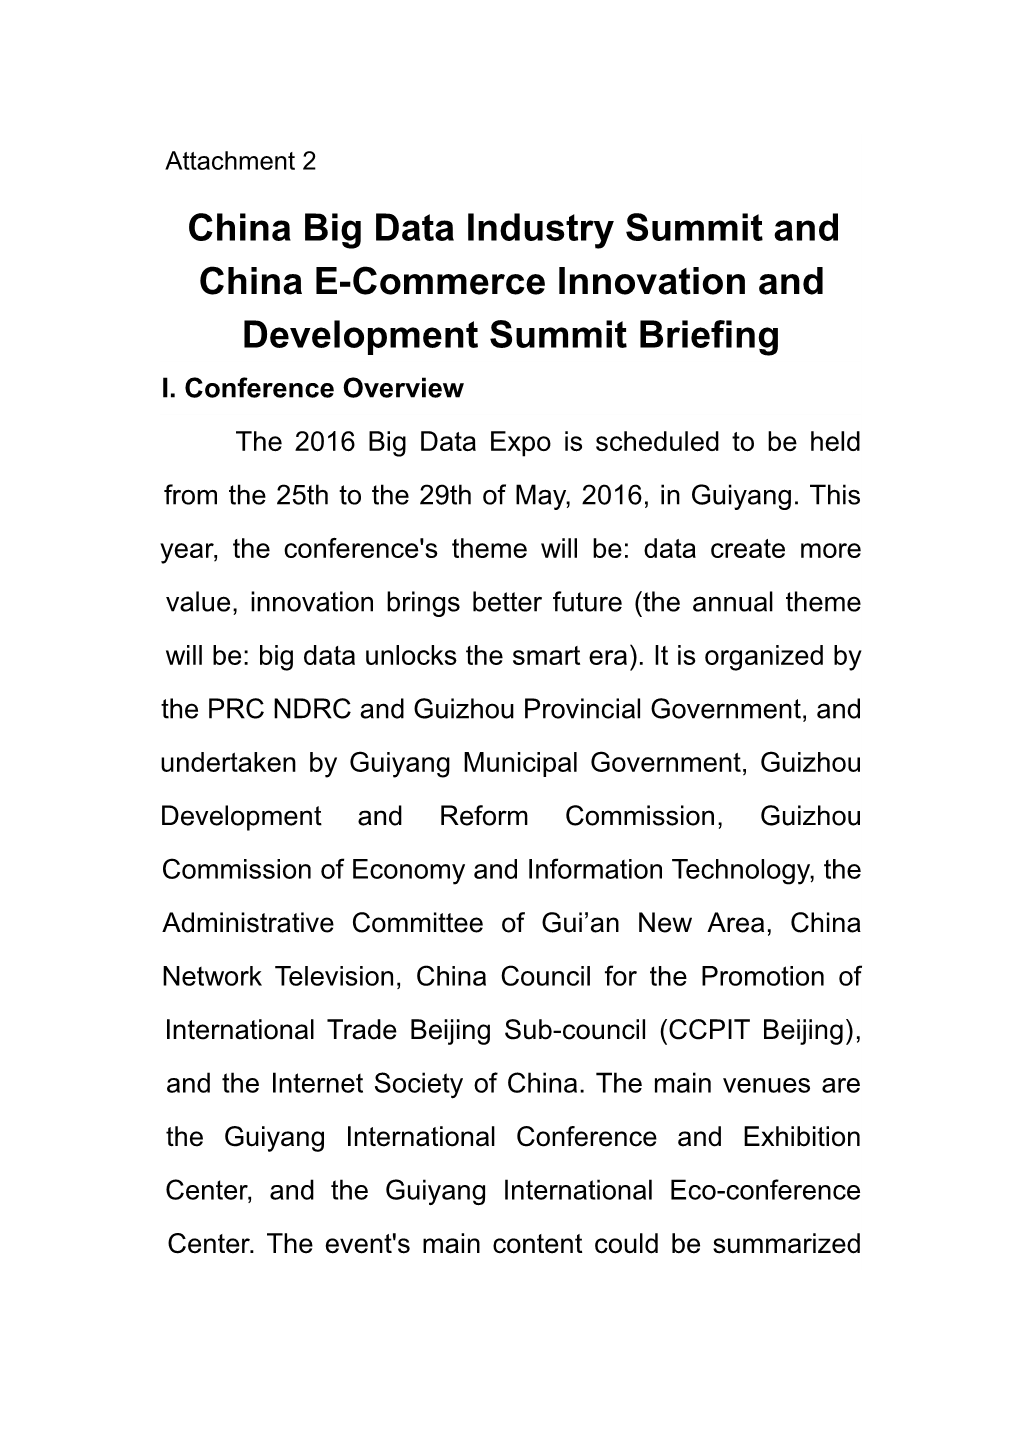 China Big Data Industry Summit and China E-Commerce Innovation and Development Summit Briefing